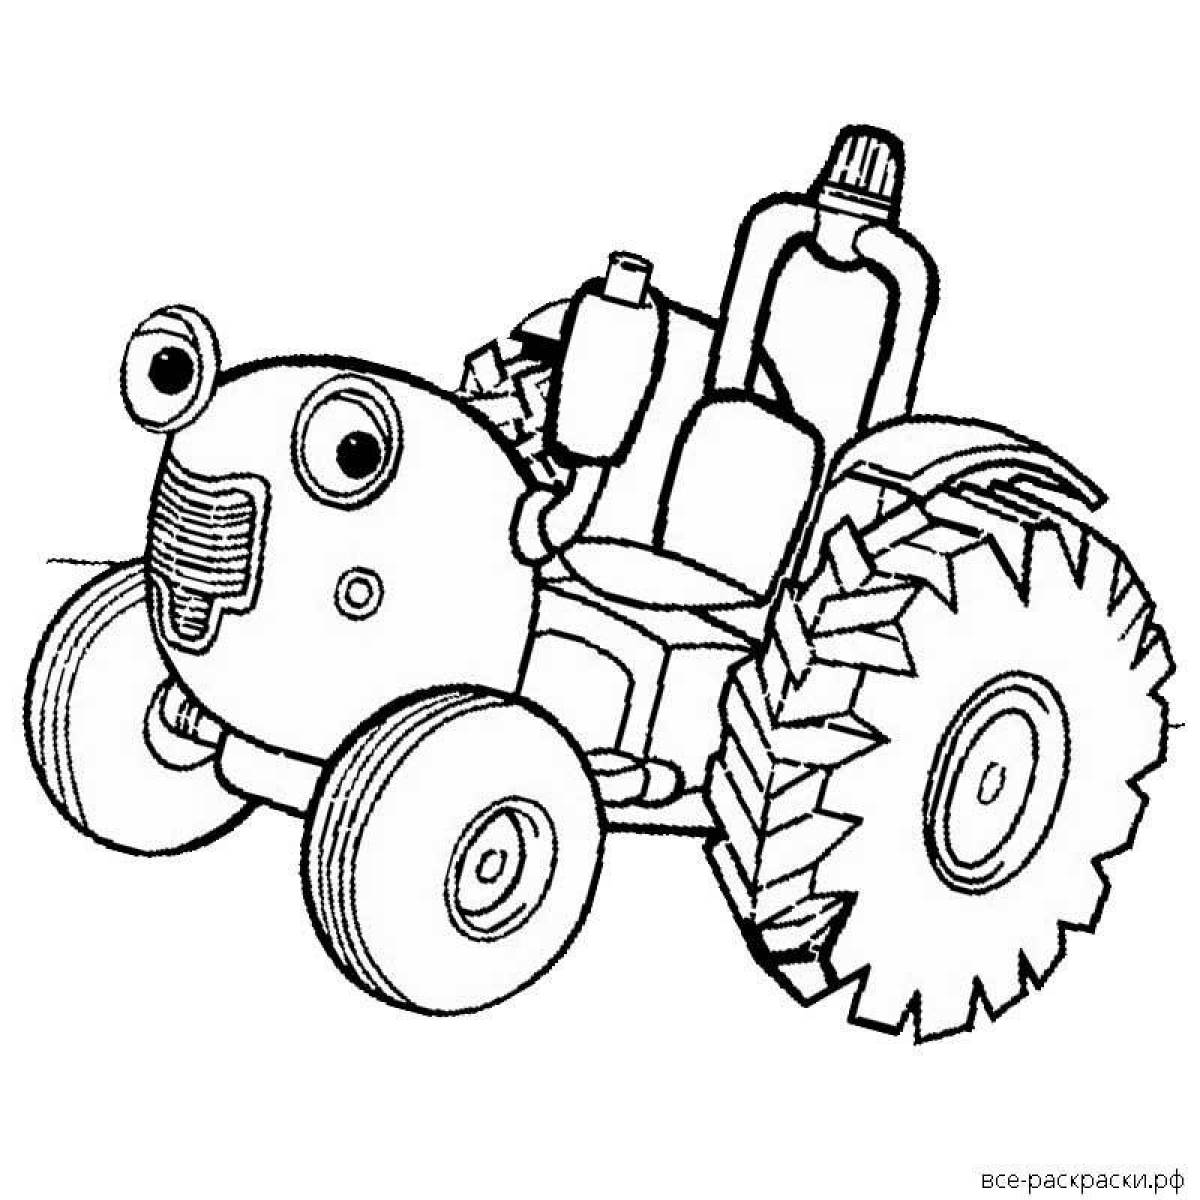 Shining blue tractor coloring book for kids